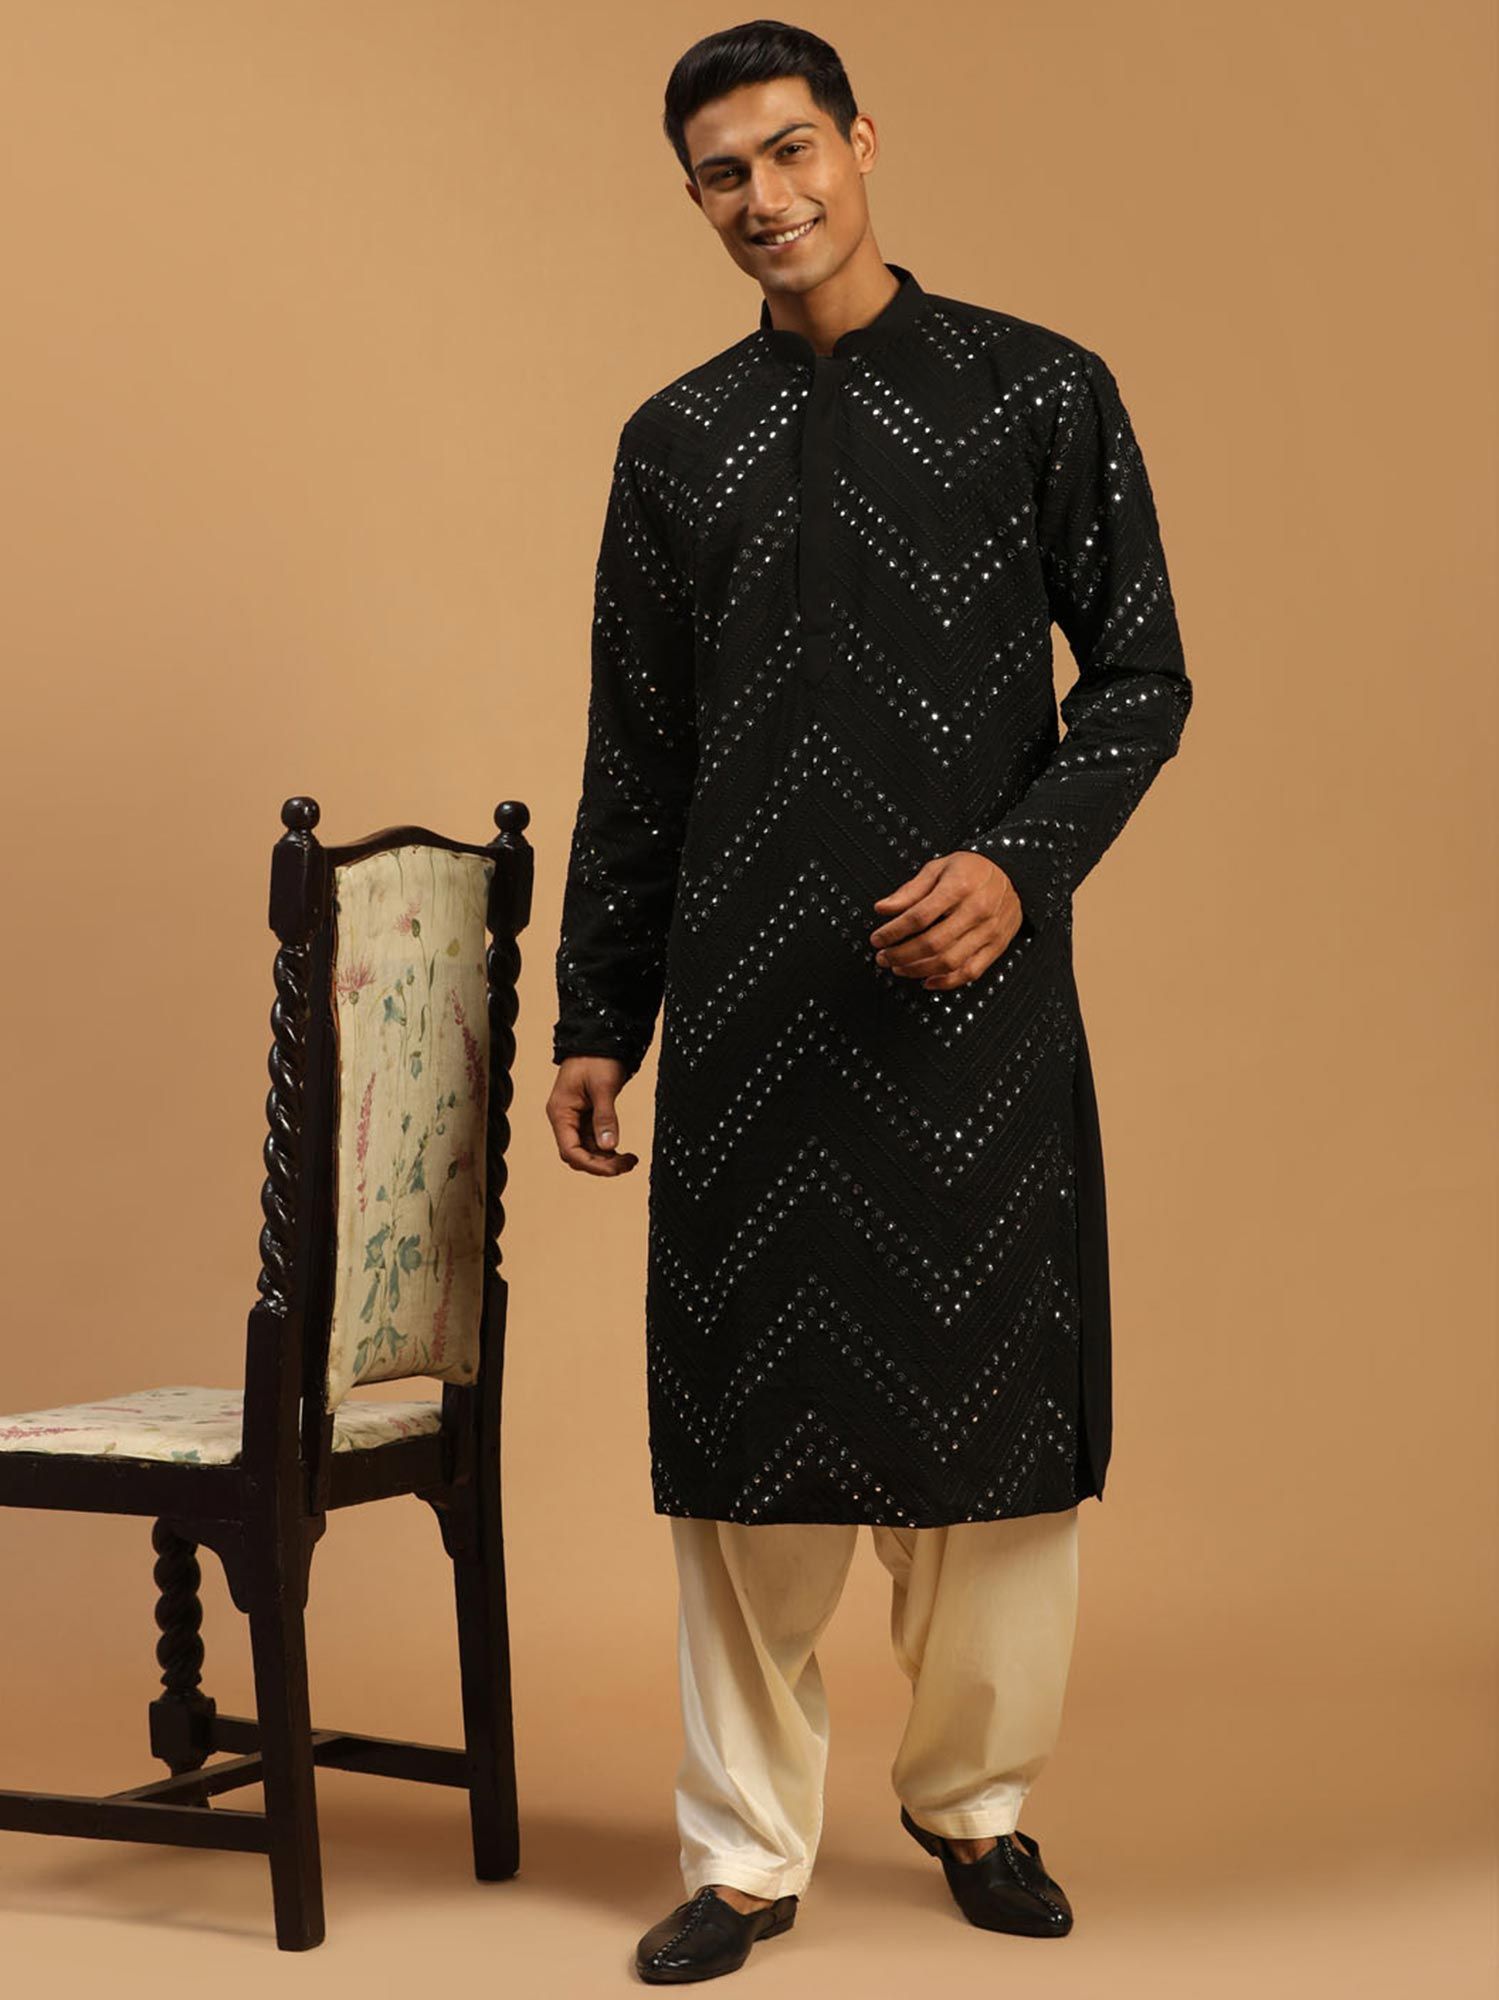 FMSE Boys Casual Pathani Suit Set Price in India - Buy FMSE Boys Casual Pathani  Suit Set online at Flipkart.com